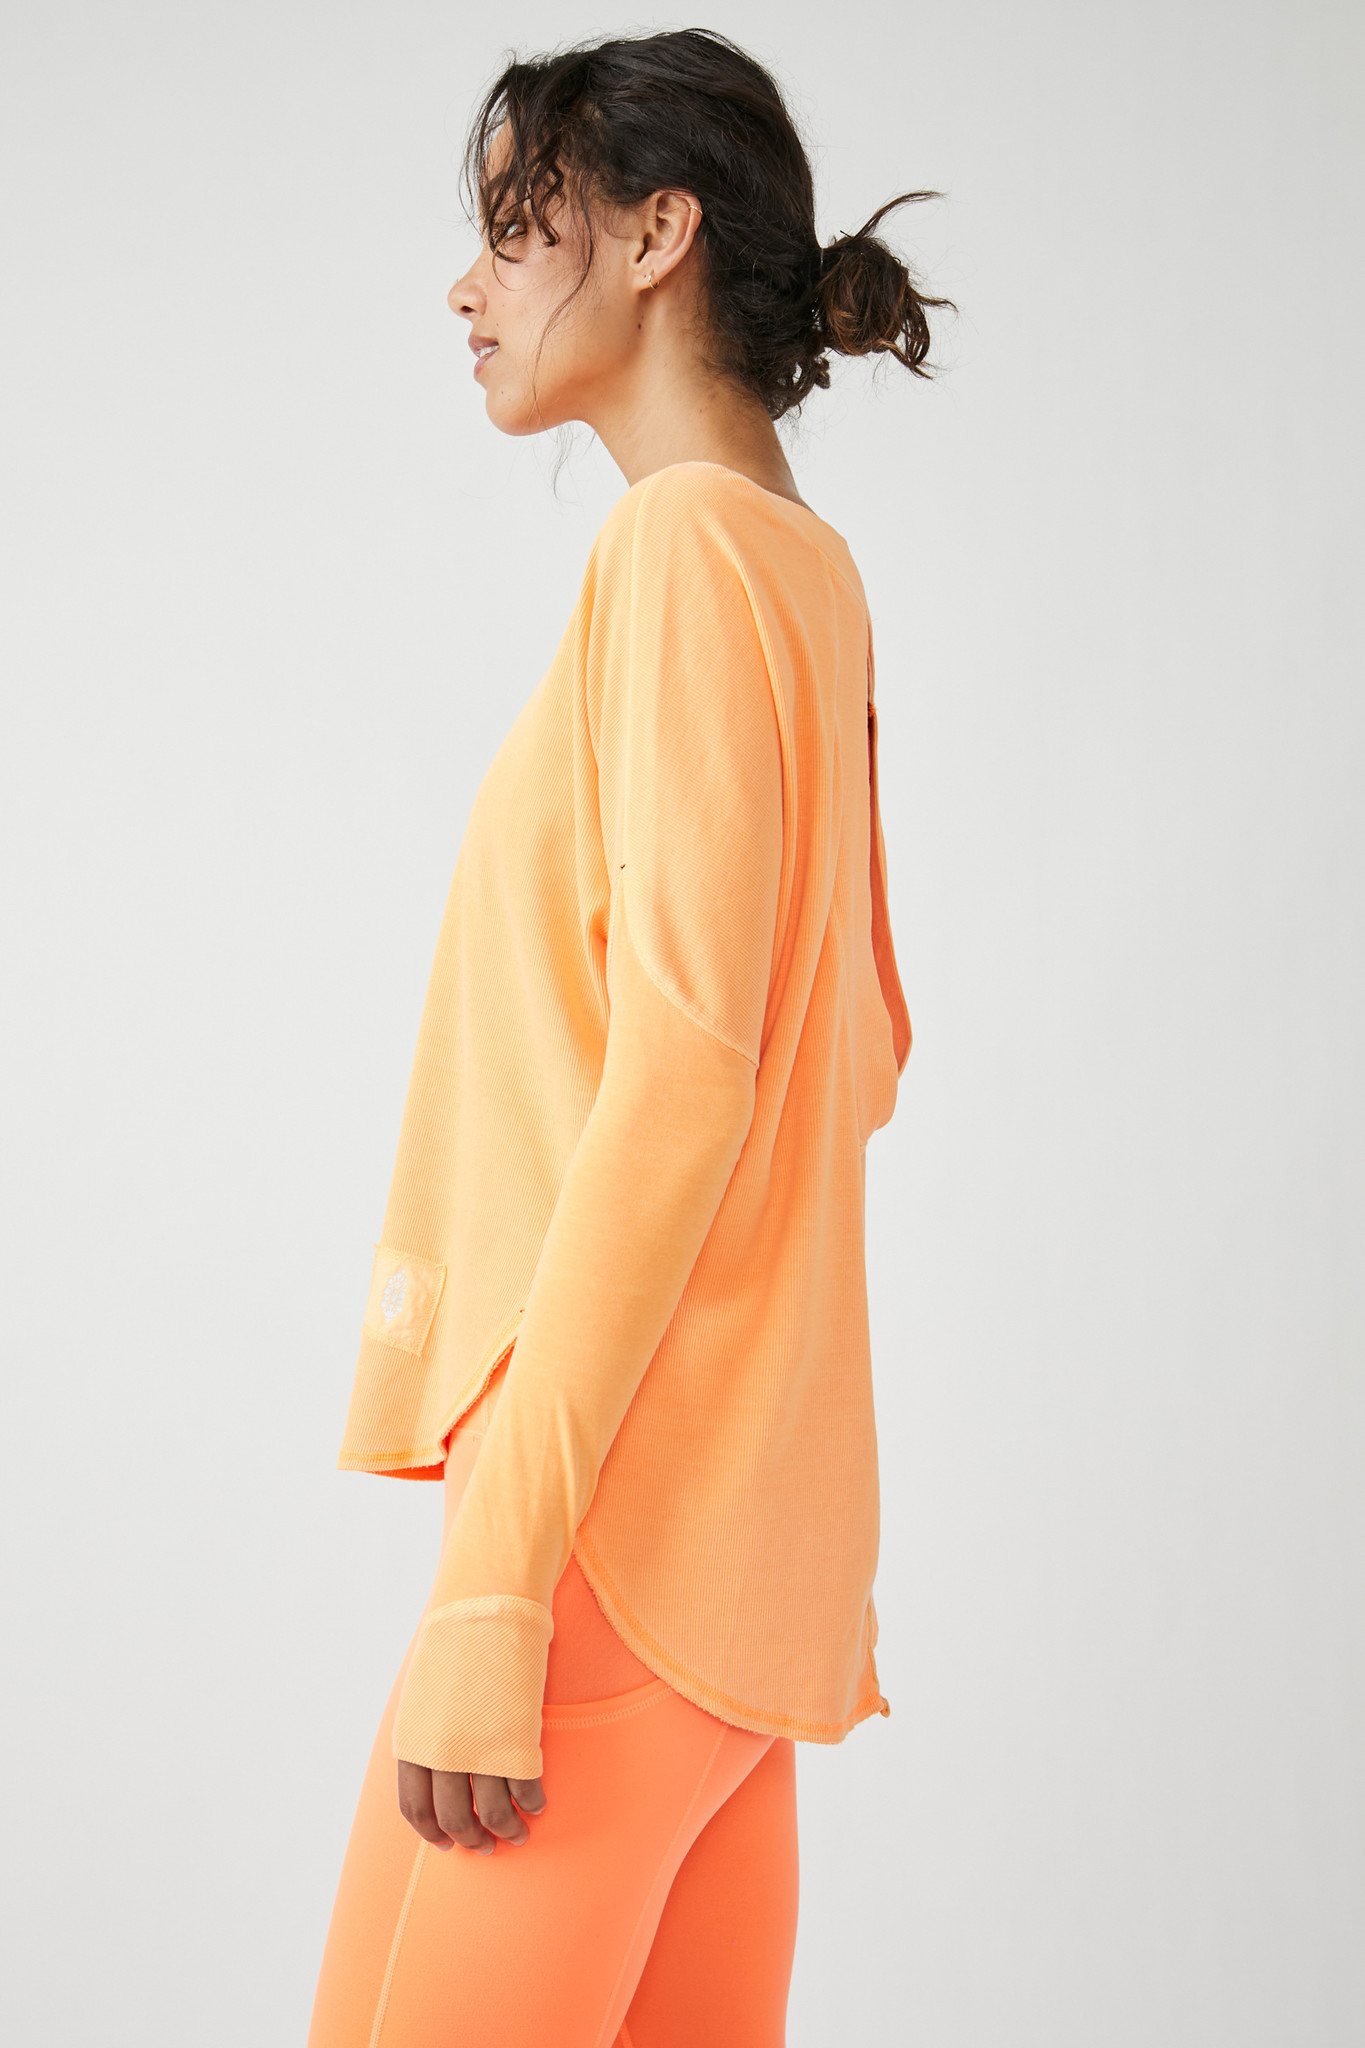 FP Movement Simply Layer Open Back Top